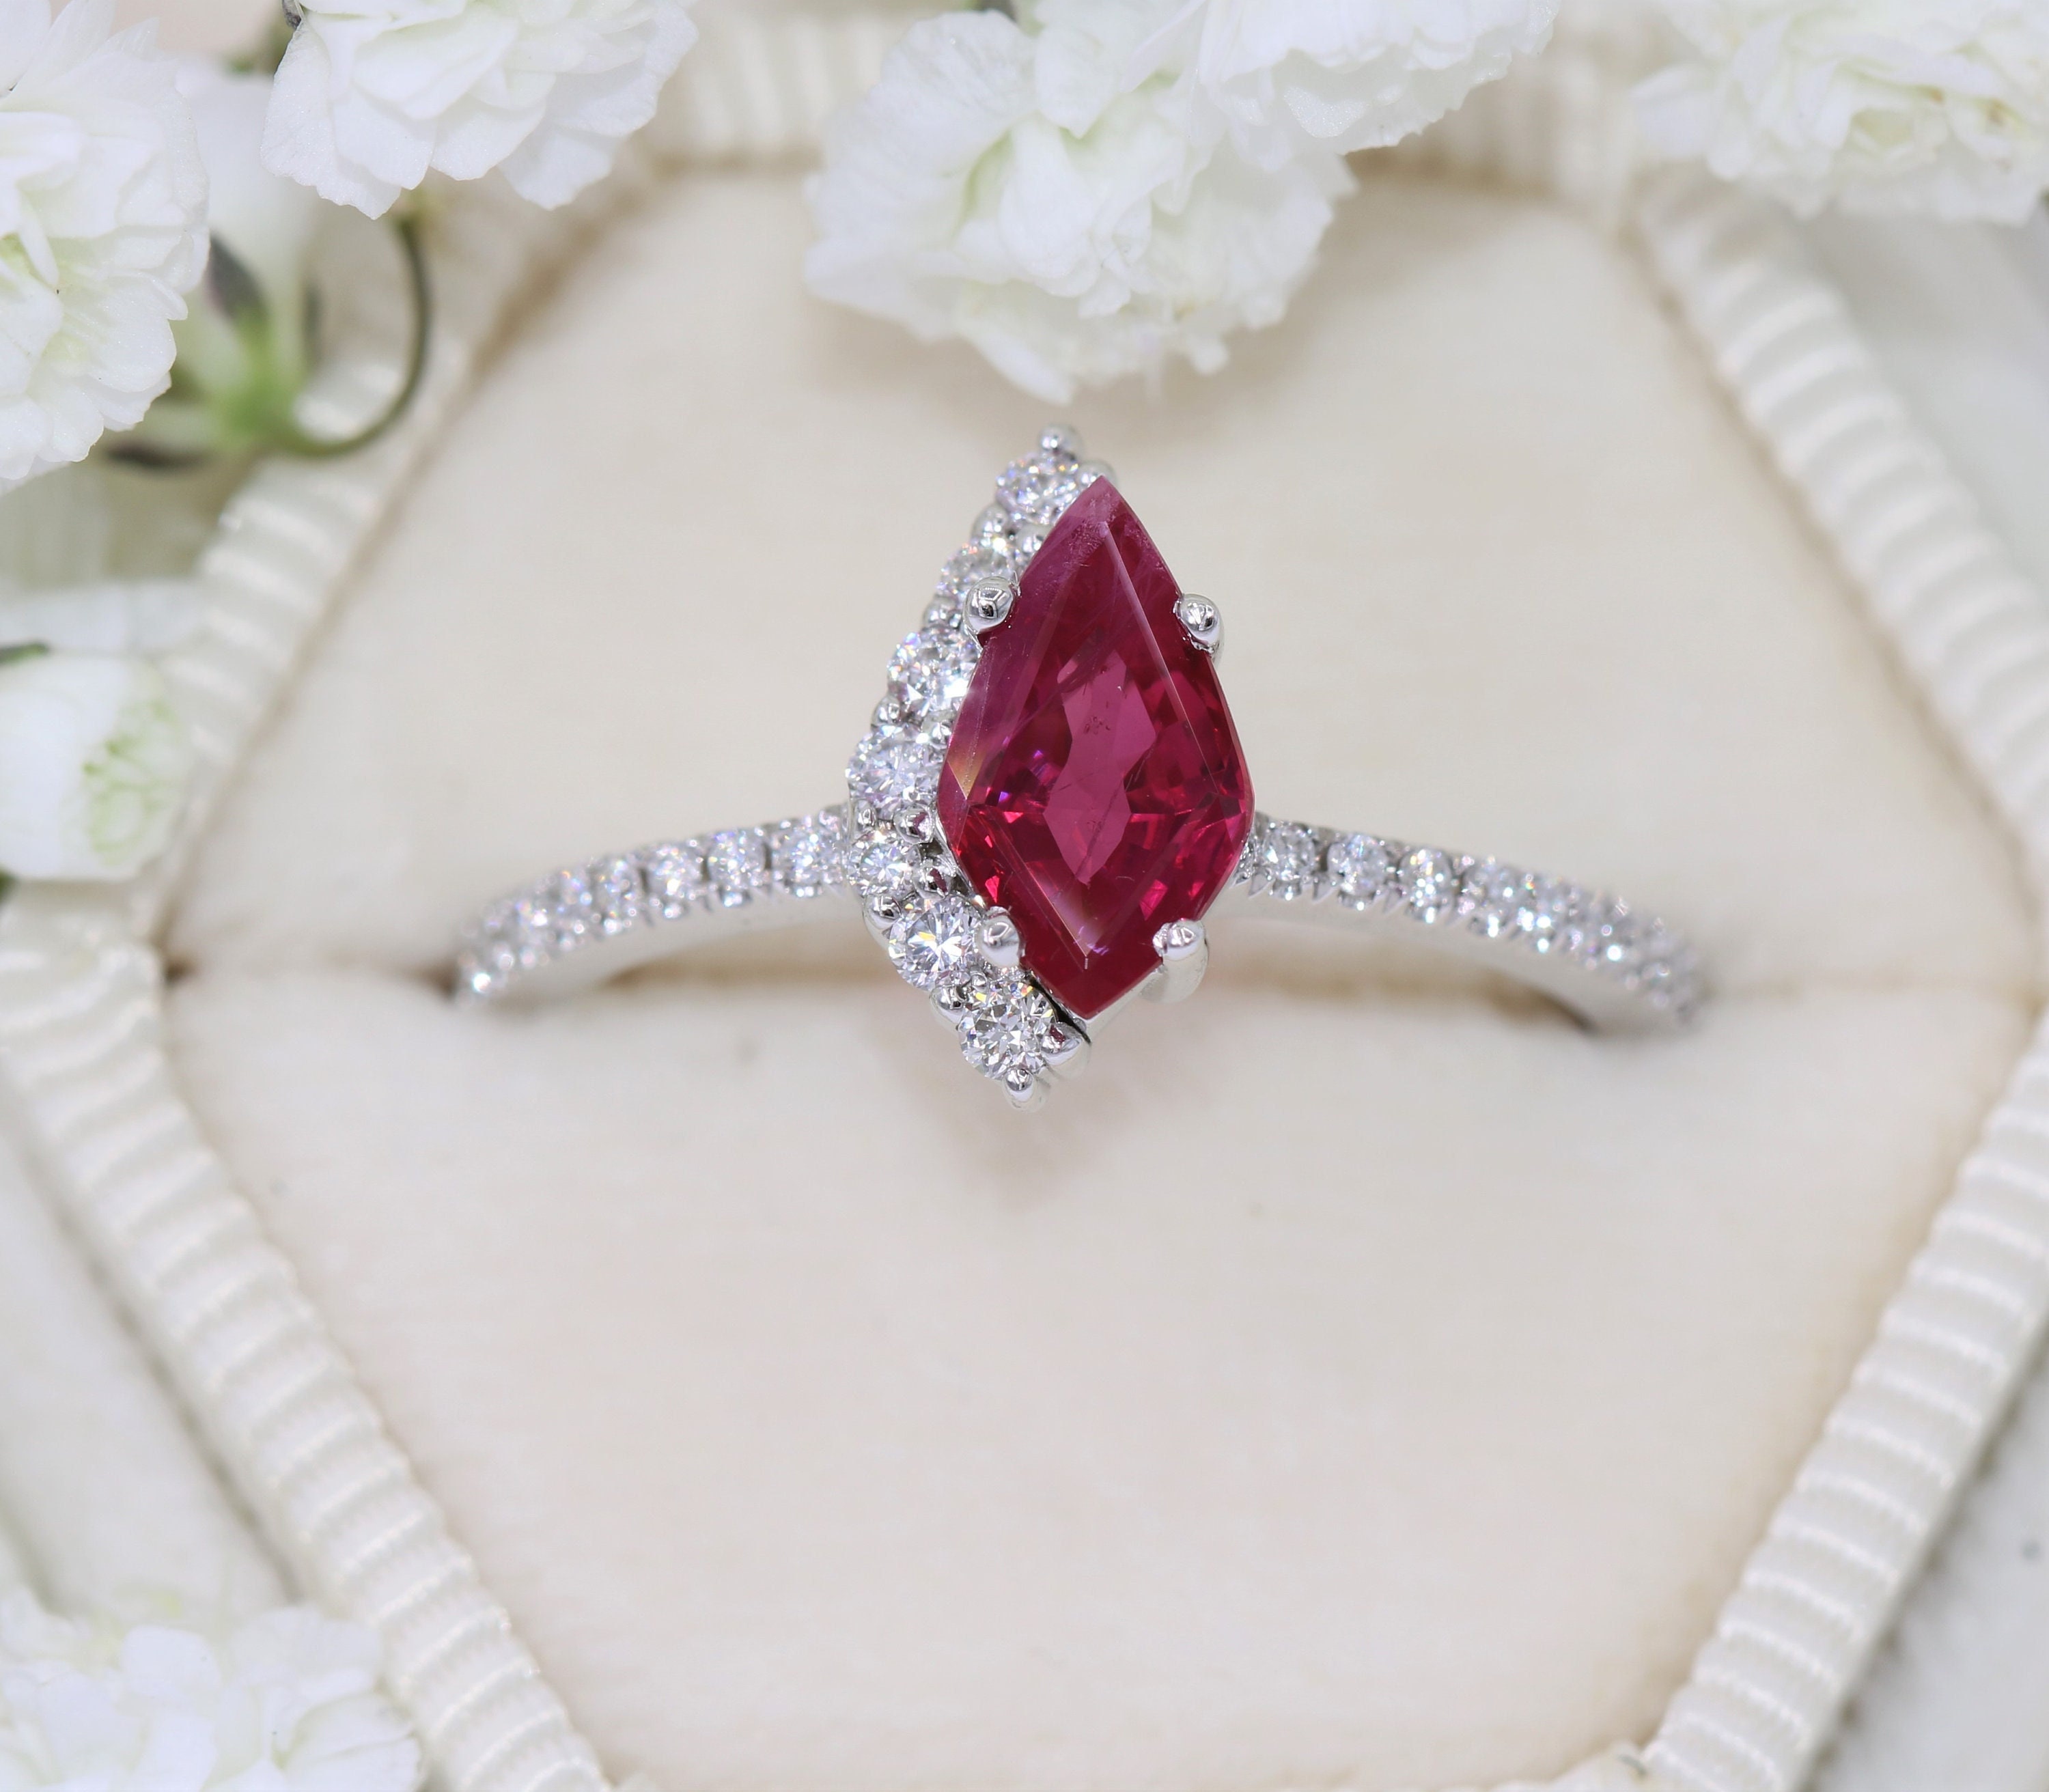 Natural Ruby and Diamond Ring 6.5 14k W Gold 2.46 TCW Certified $3,950 –  Certified Fine Jewelry